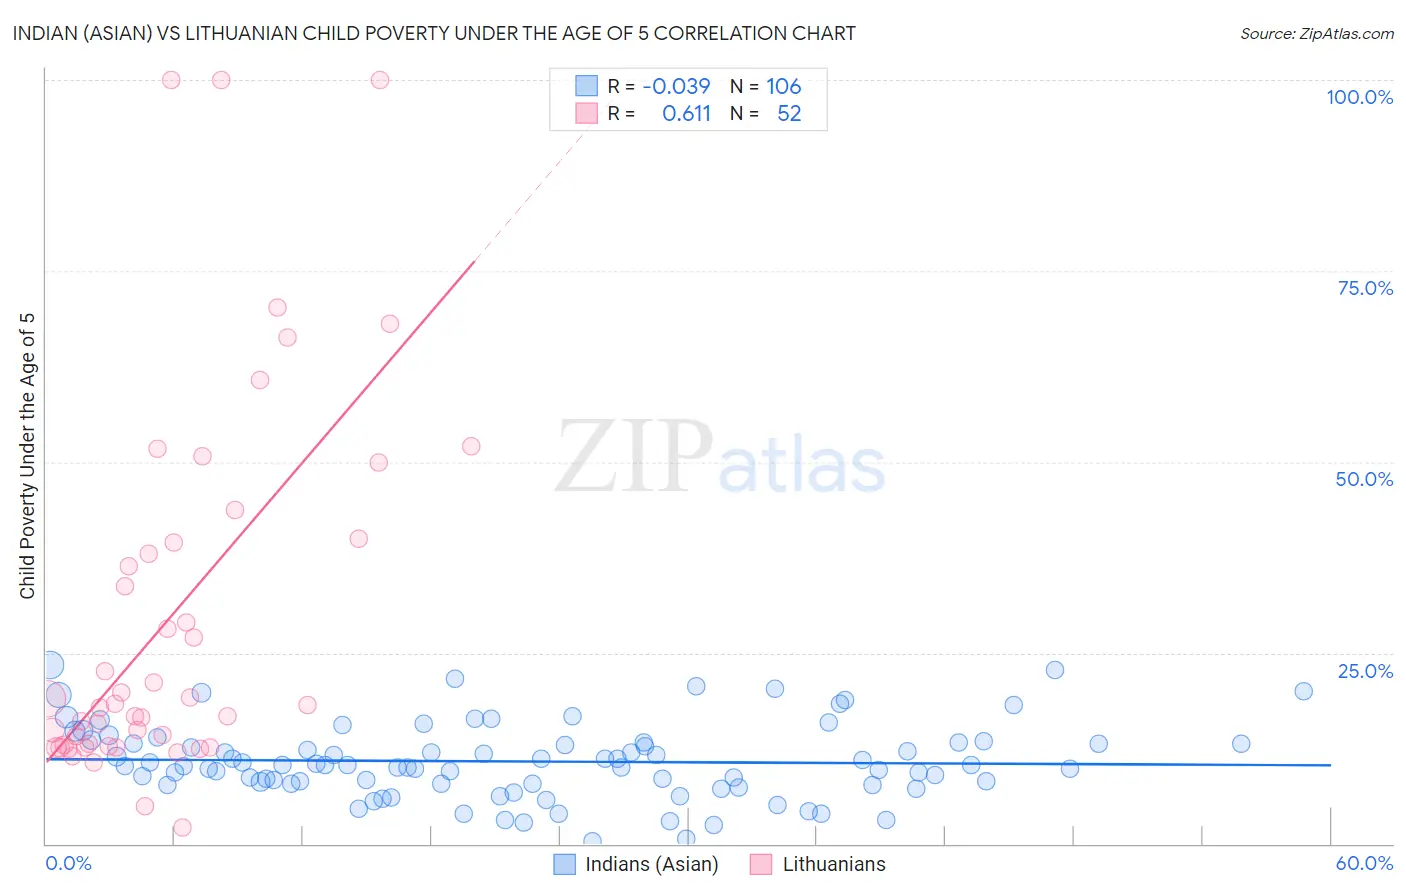 Indian (Asian) vs Lithuanian Child Poverty Under the Age of 5